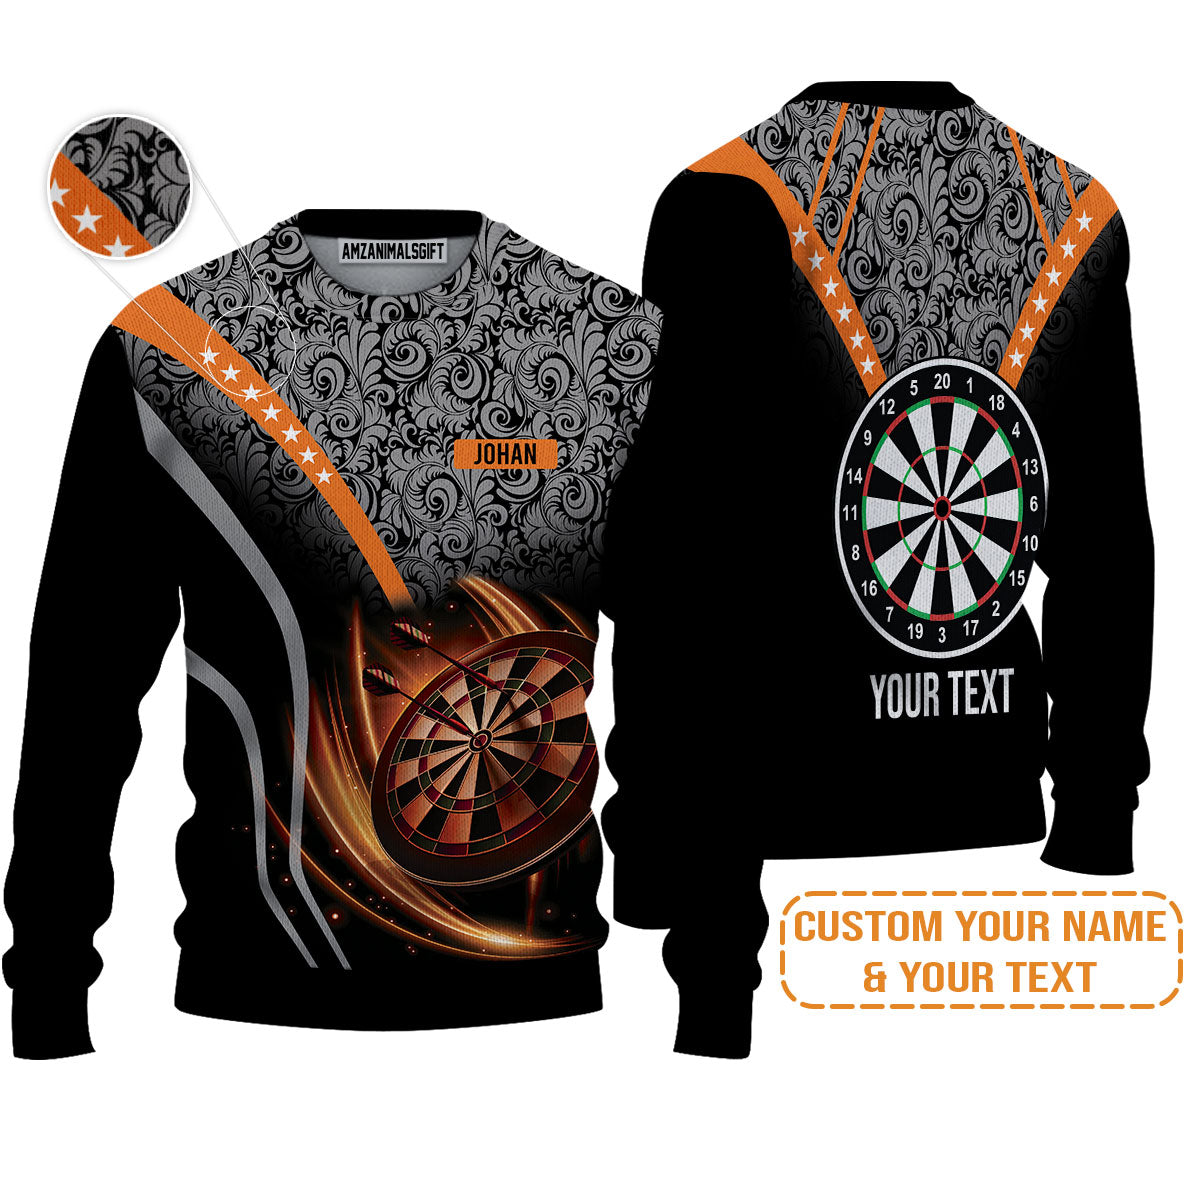 Customized Name & Text Darts Sweater, Personalized Name Dartboard Orange Sweater - Gift For Darts Players